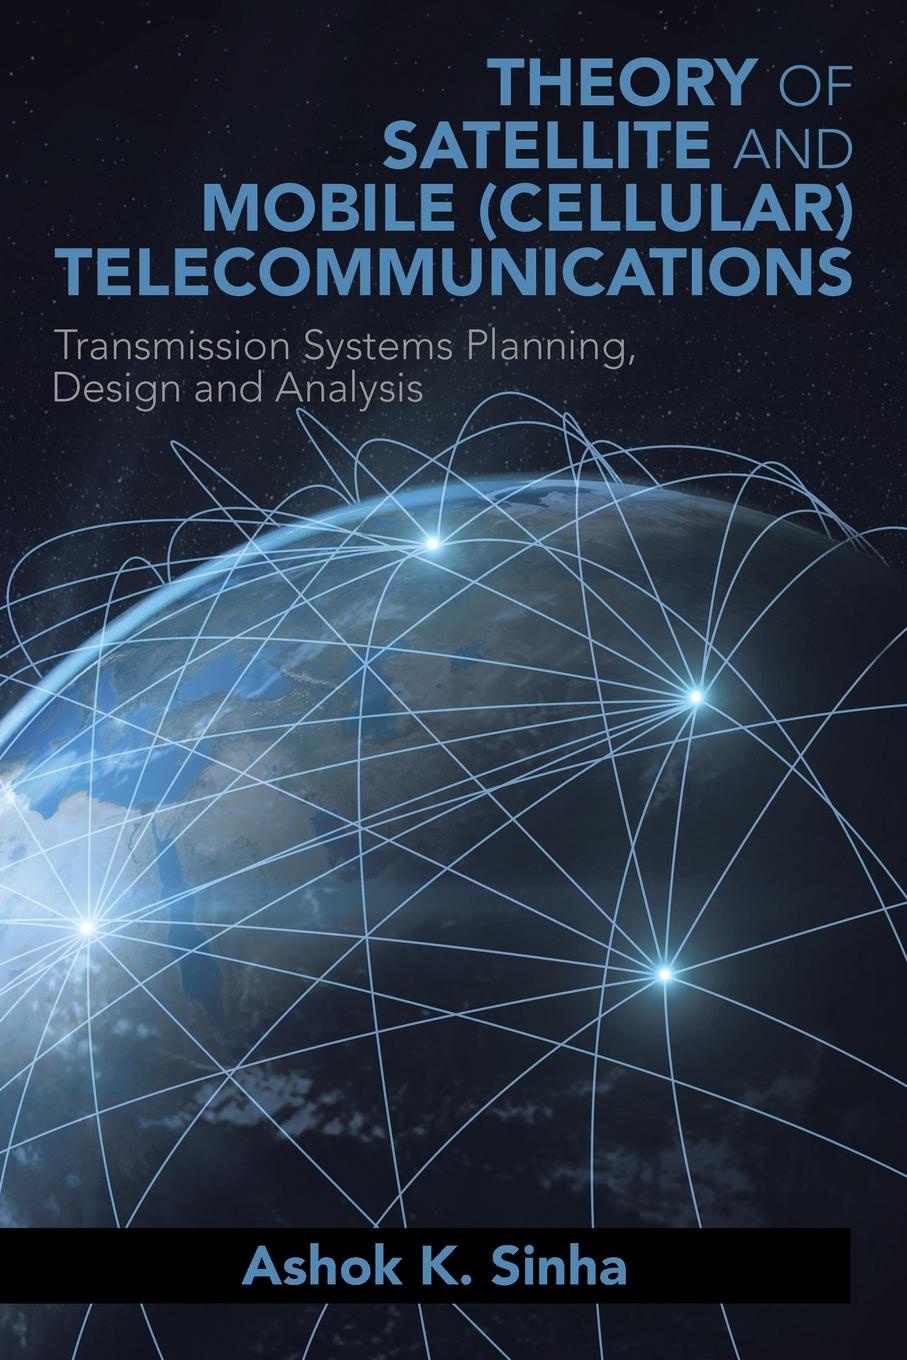 THEORY OF SATELLITE AND MOBILE (CELLULAR) TELECOMMUNICATIONS. Transmission Systems Planning, Design and Analysis